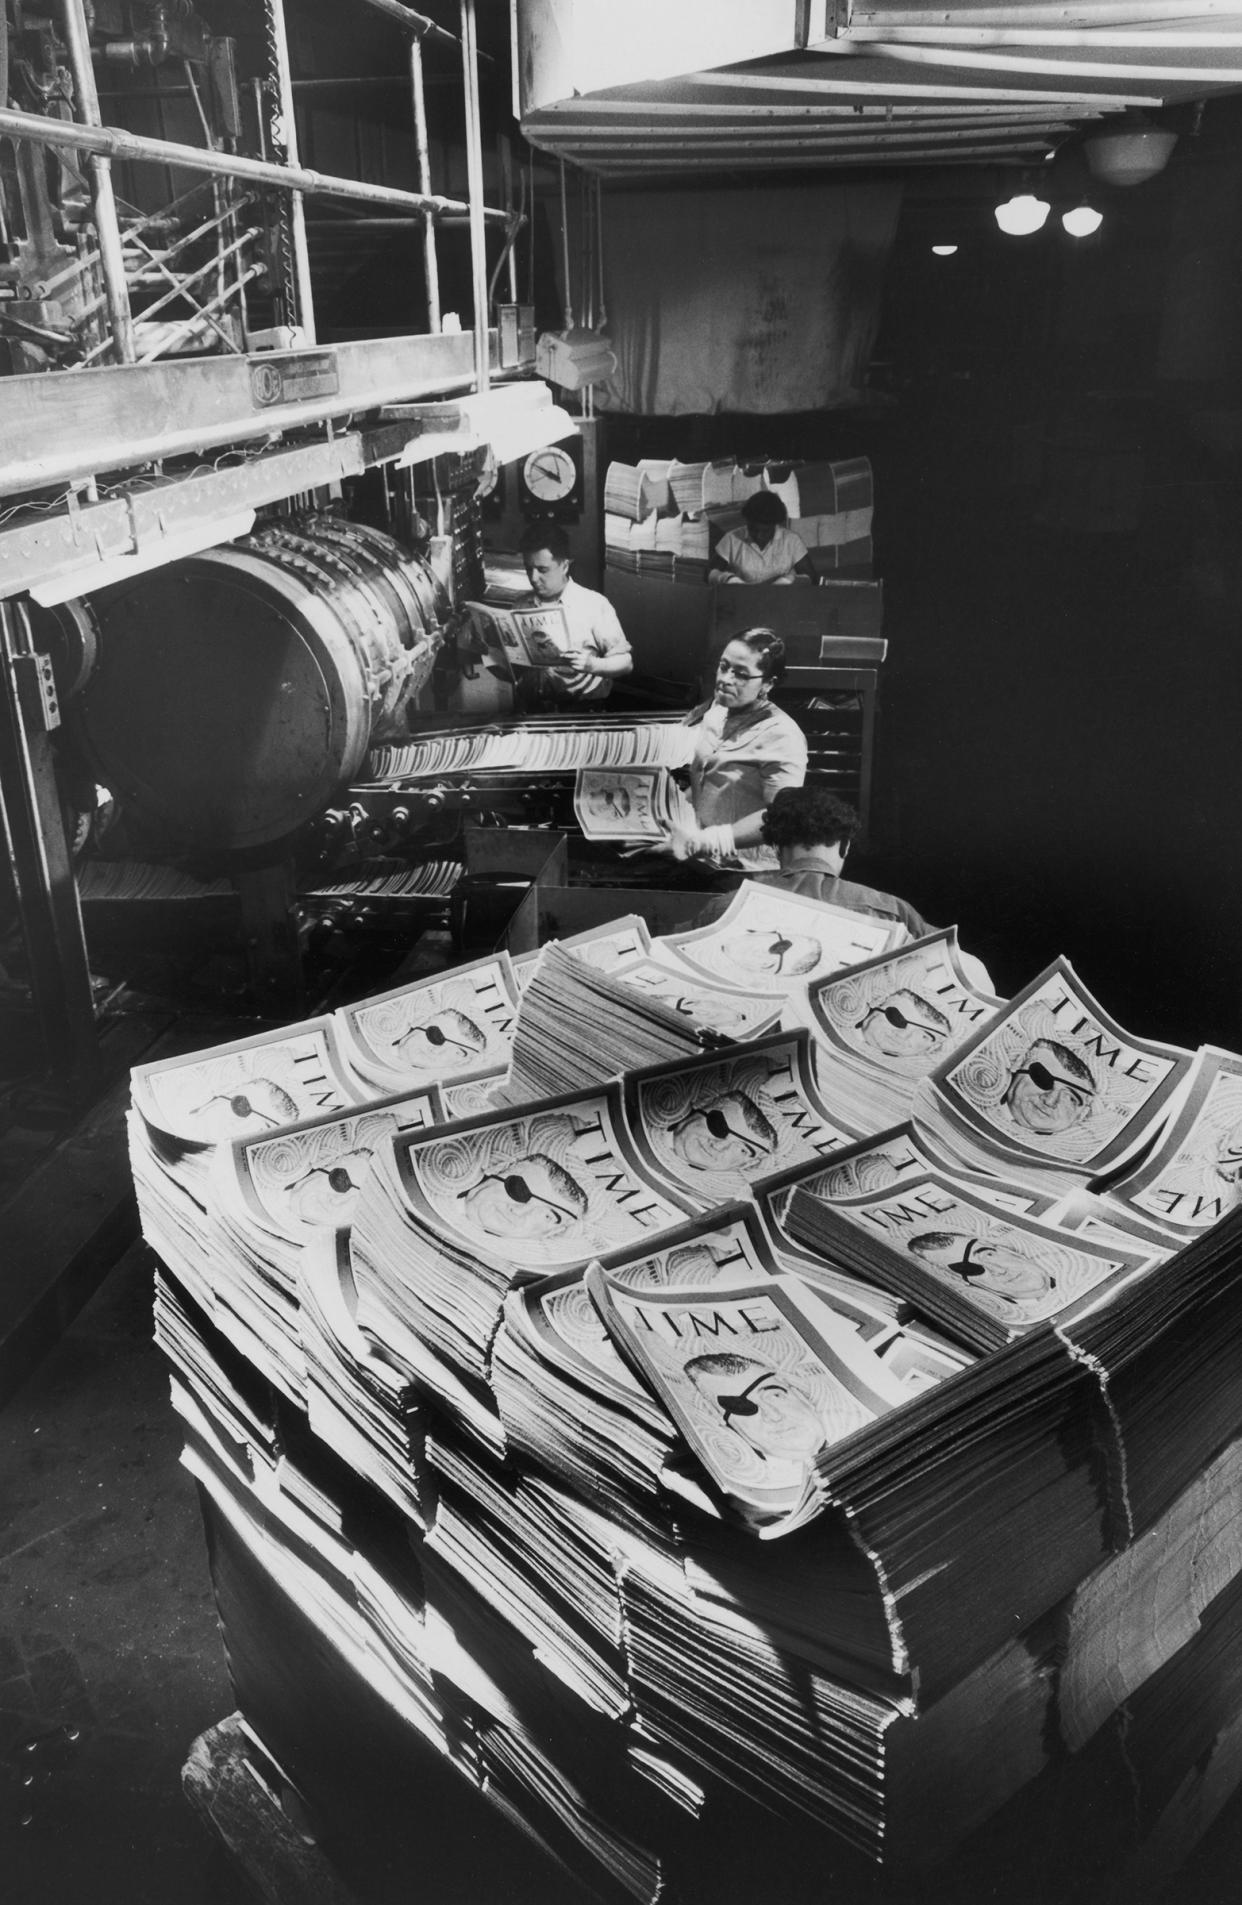 Issues of TIME are stacked at the R.R. Donnelley & Sons Company printing press in Crawfordsville, Ind., 1956.